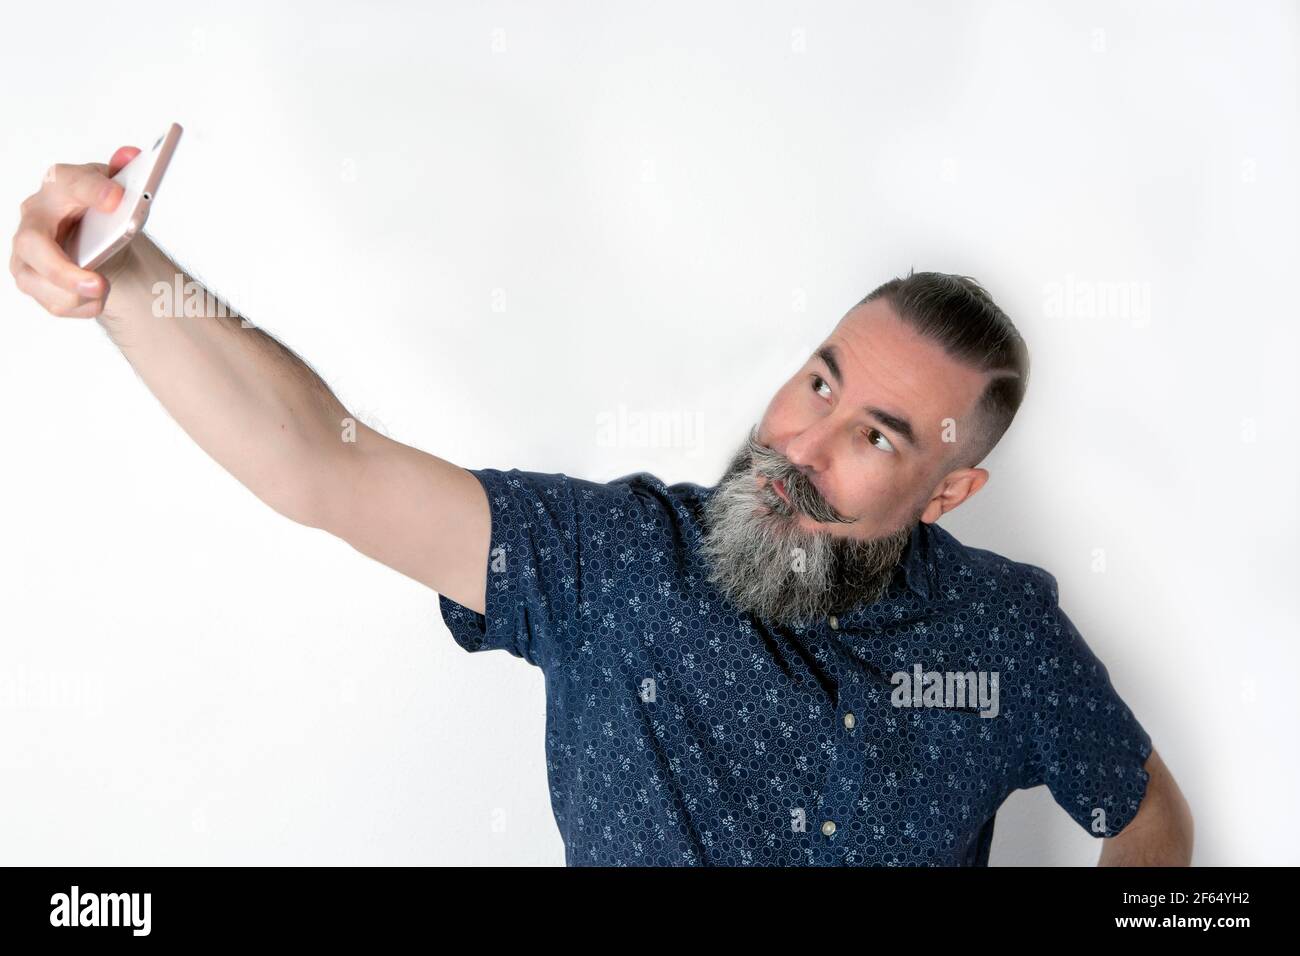 40-45-year-old man with a large, medium-gray beard using his smart phone to take a self-portrait (sefie) Stock Photo